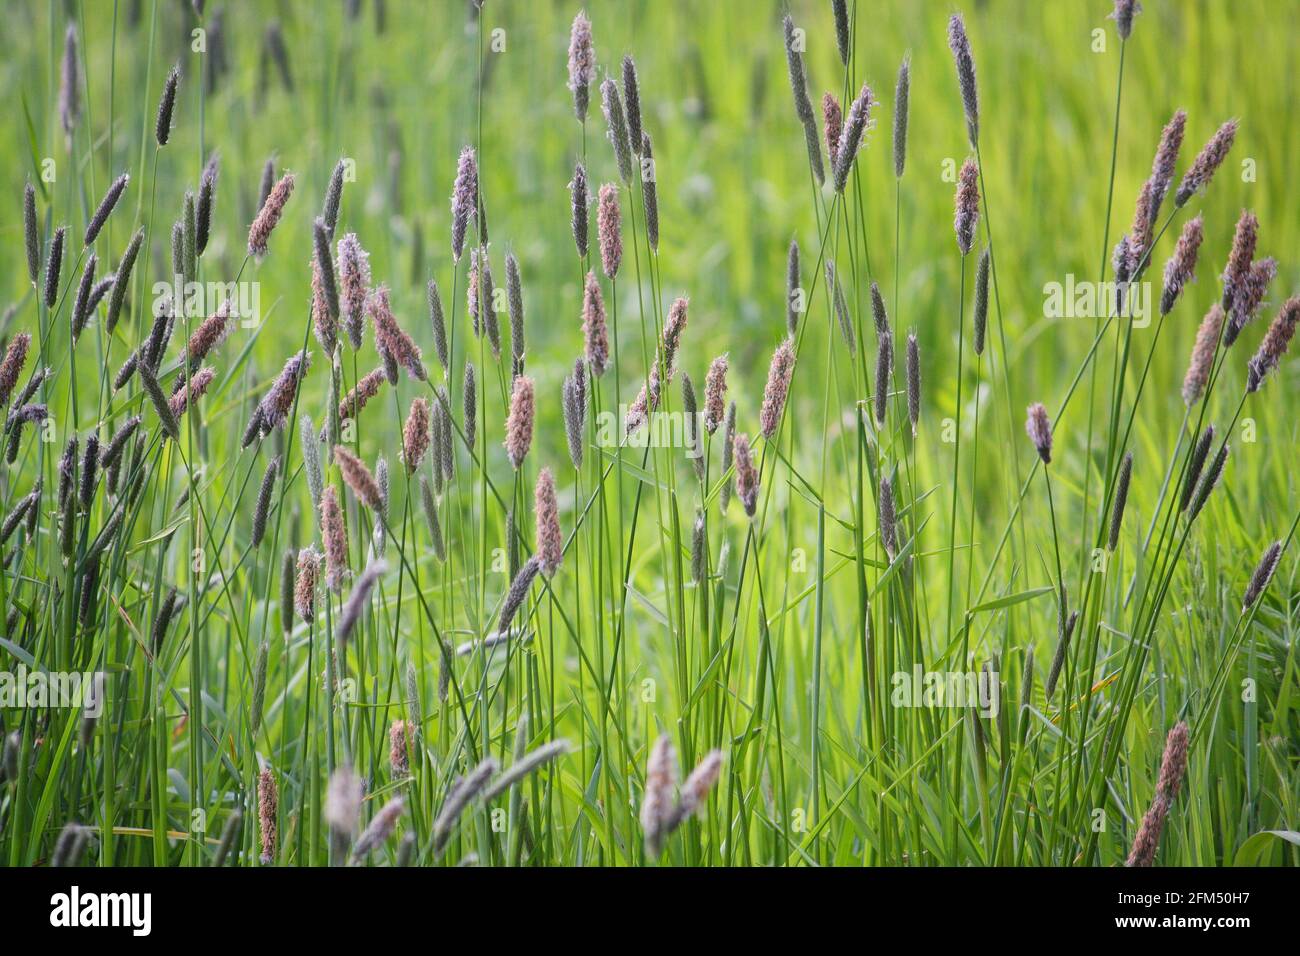 Alopecurus pratensis, also known as Meadow foxtail or Field foxtail, a grass with purple-coloured flower spikes Stock Photo